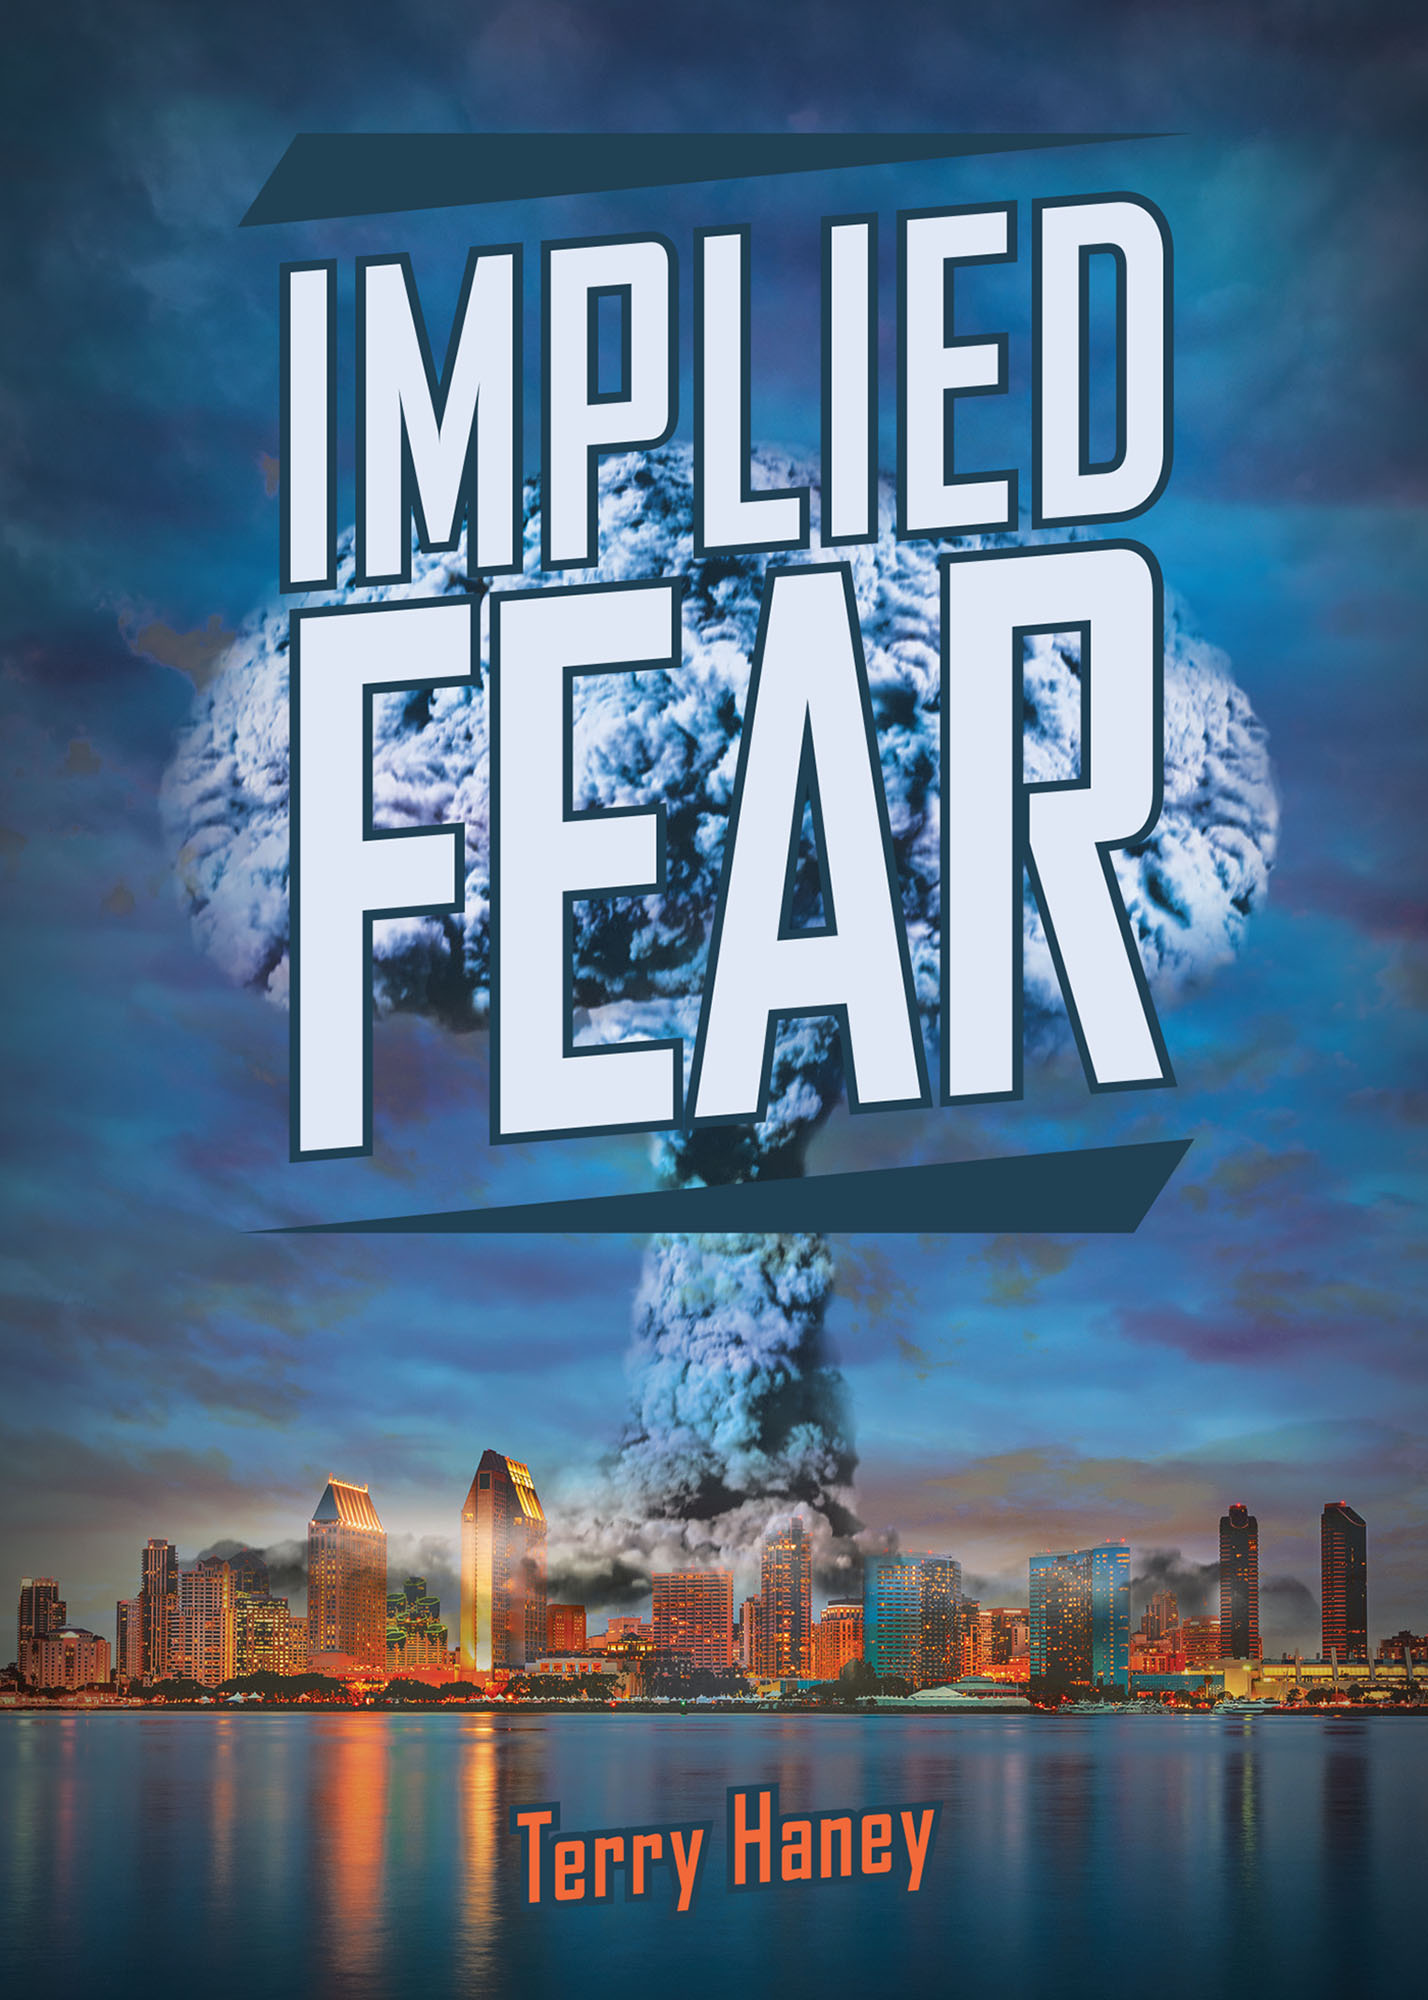 Implied Fear Cover Image